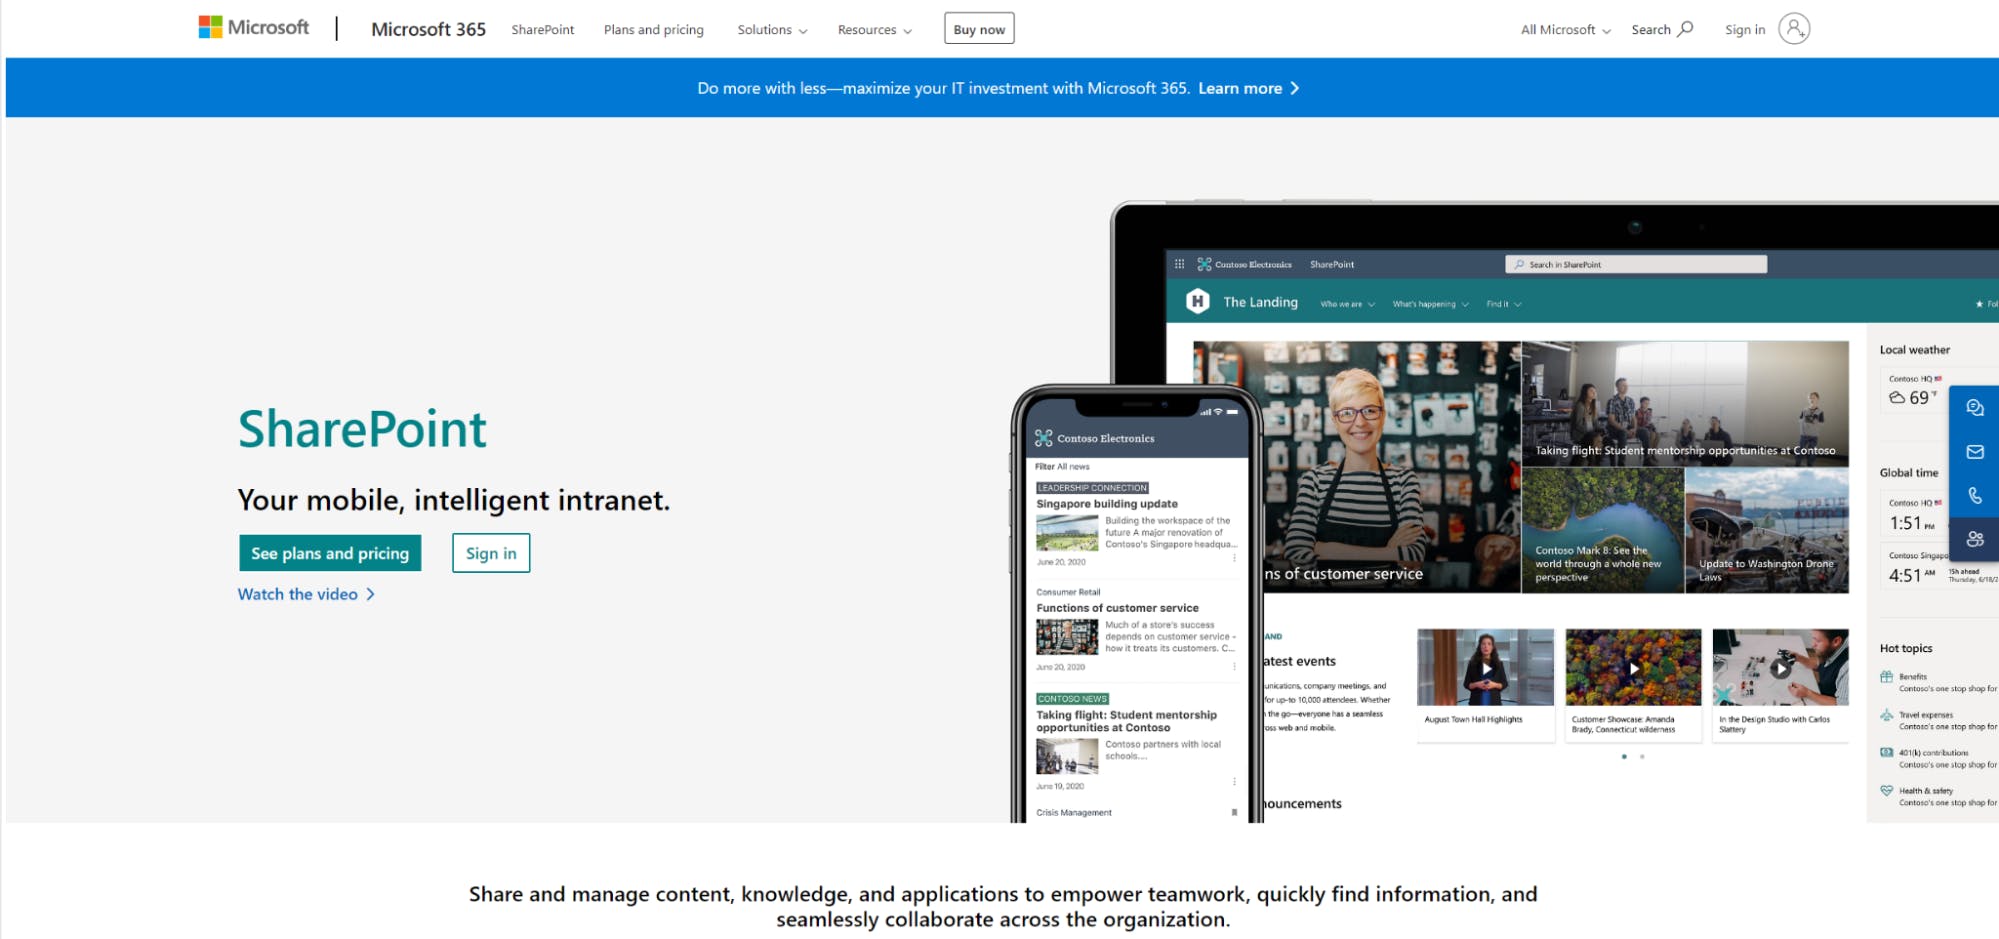 SharePoint landing page